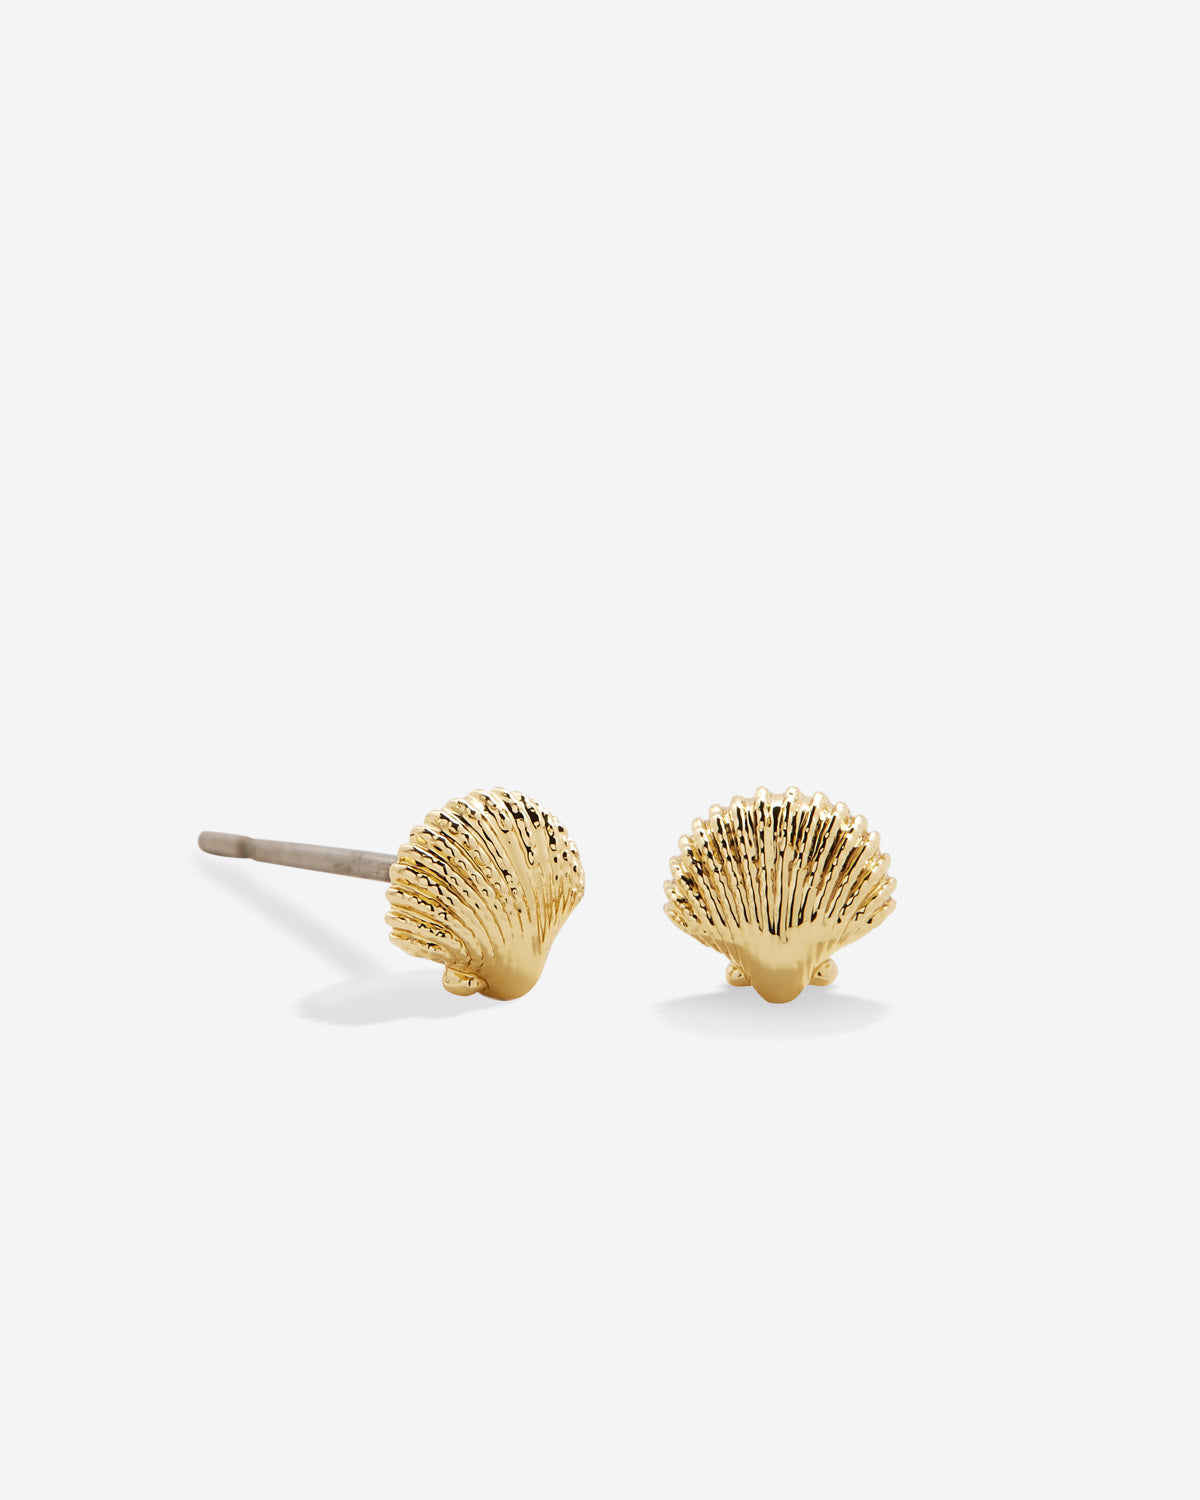 Bryan Anthonys Gold Be Your Own Kind Of Beautiful Stud Earrings Marco